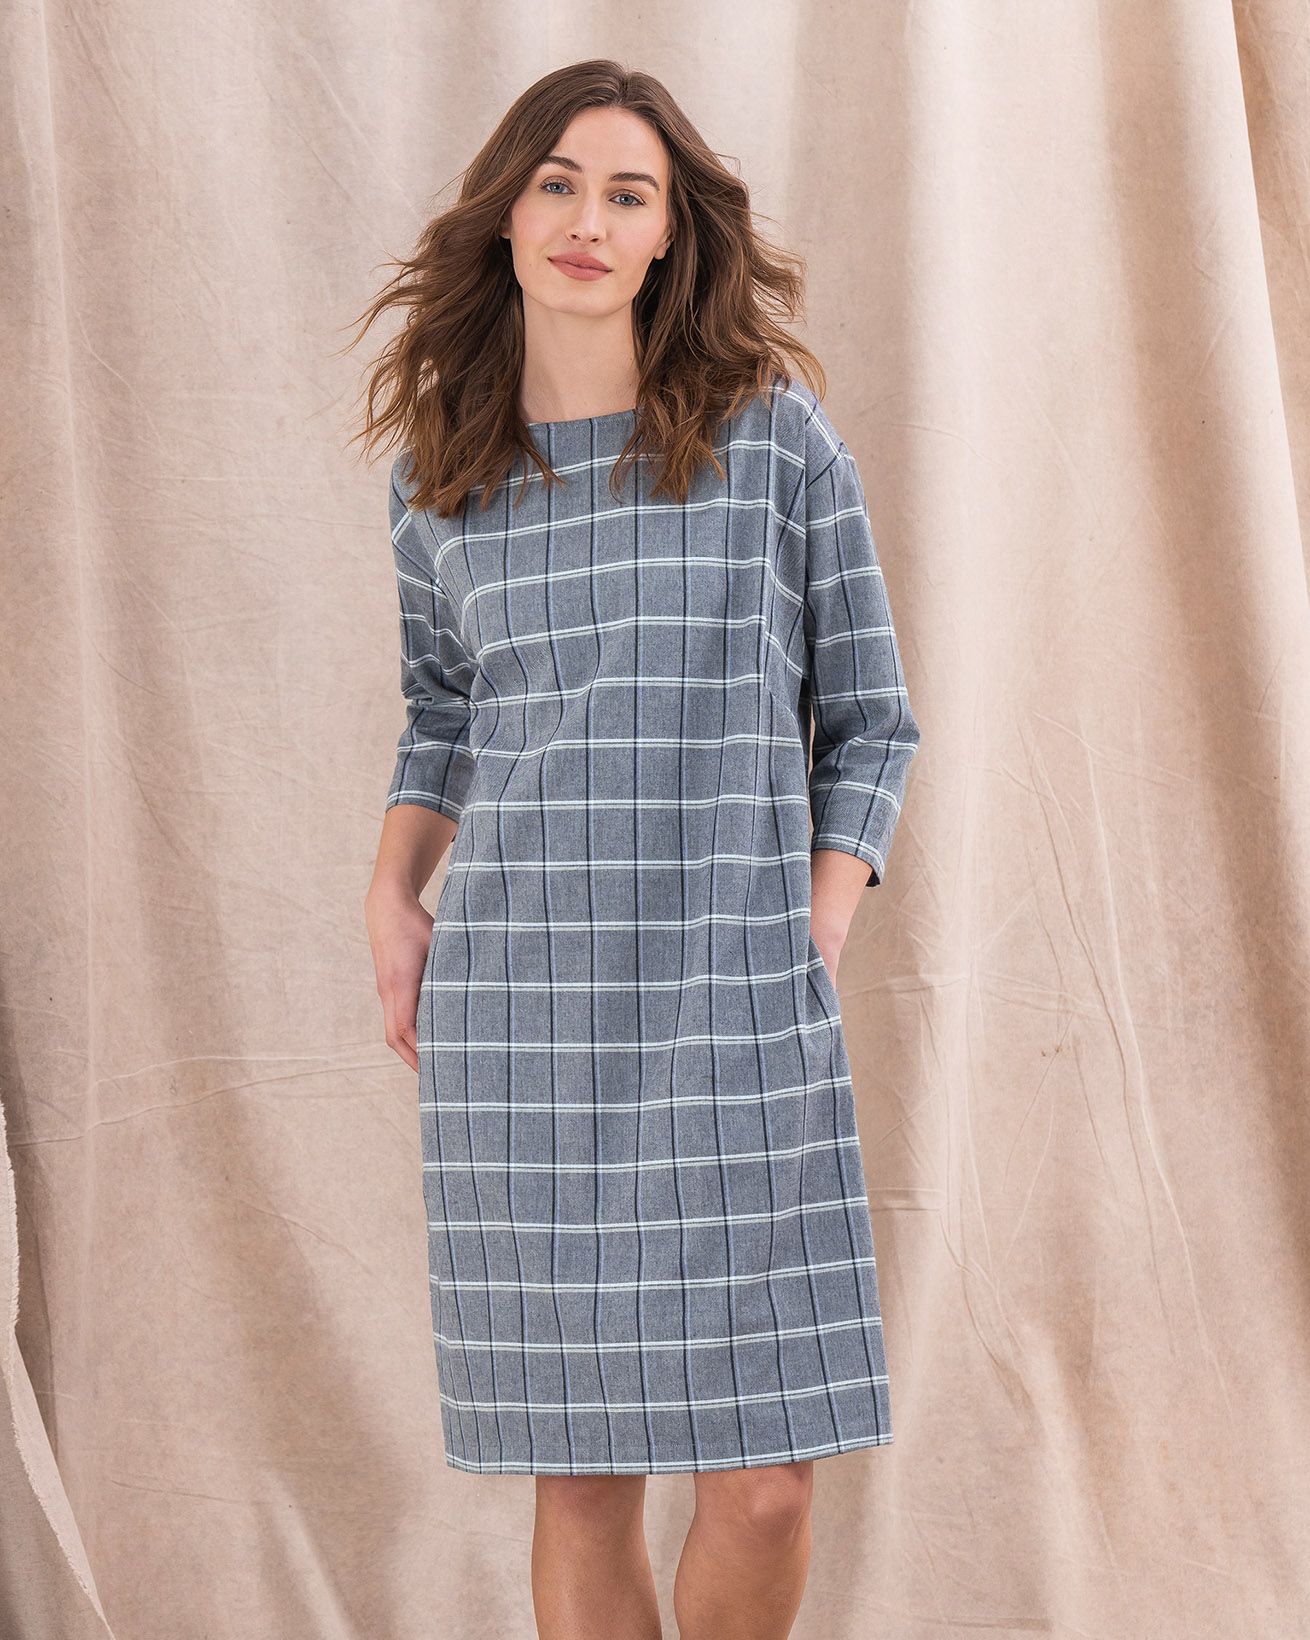 Women's Flannel Check Pyjama Bottoms from Crew Clothing Company